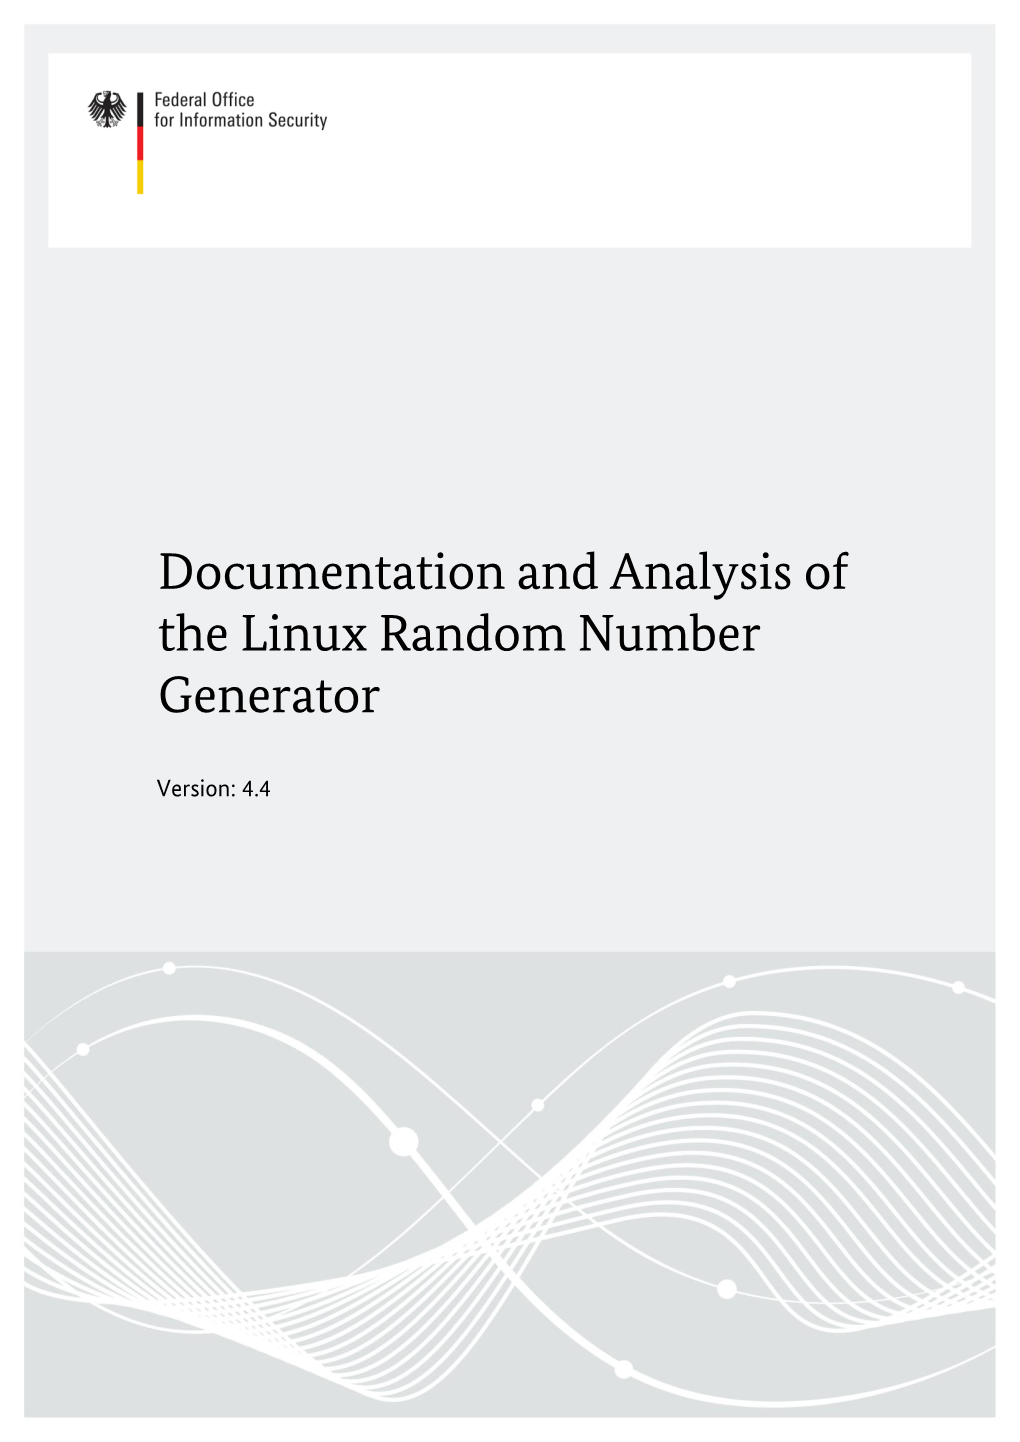 Documentation and Analysis of the Linux Random Number Generator